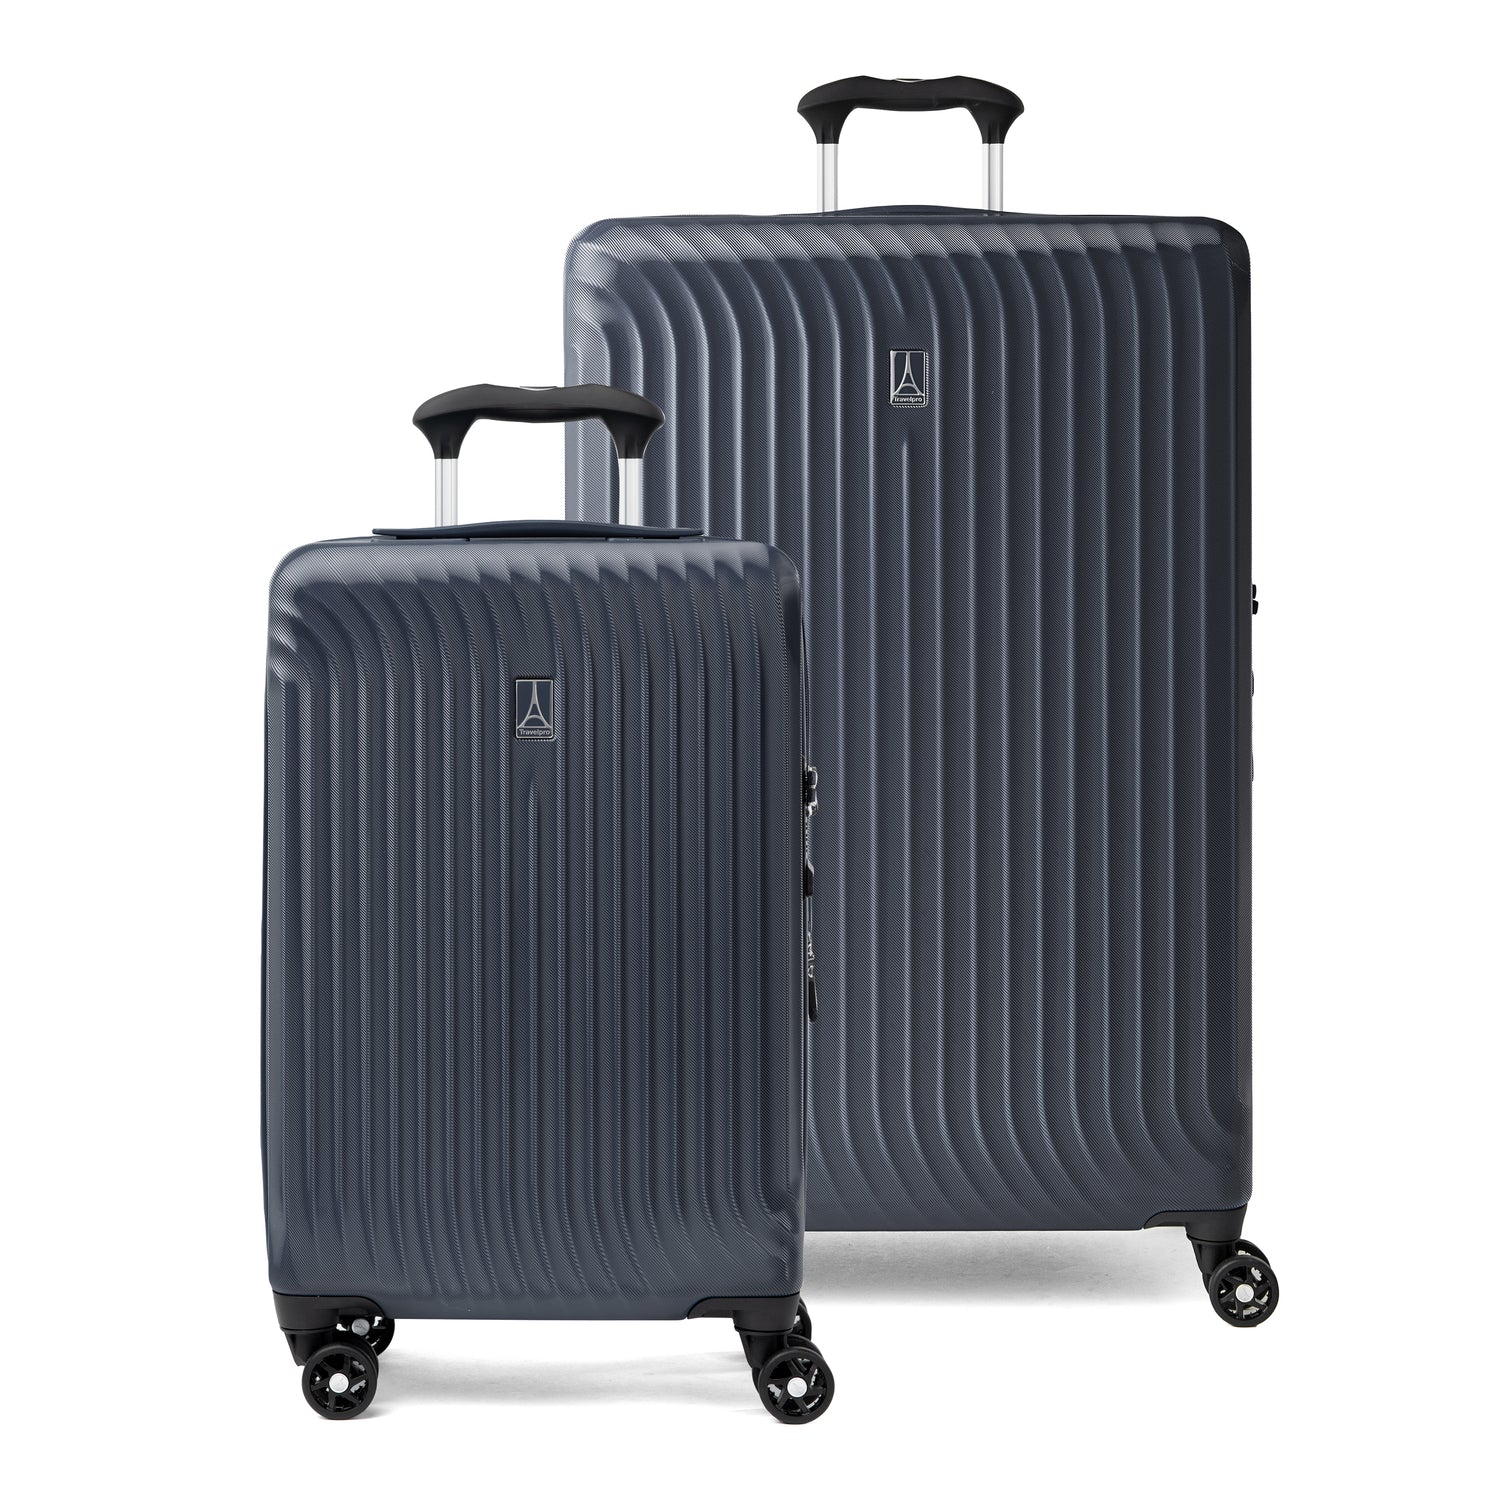 Maxlite® Air Compact Carry-On / Large Check-in Hardside Expandable Spinner Luggage Set